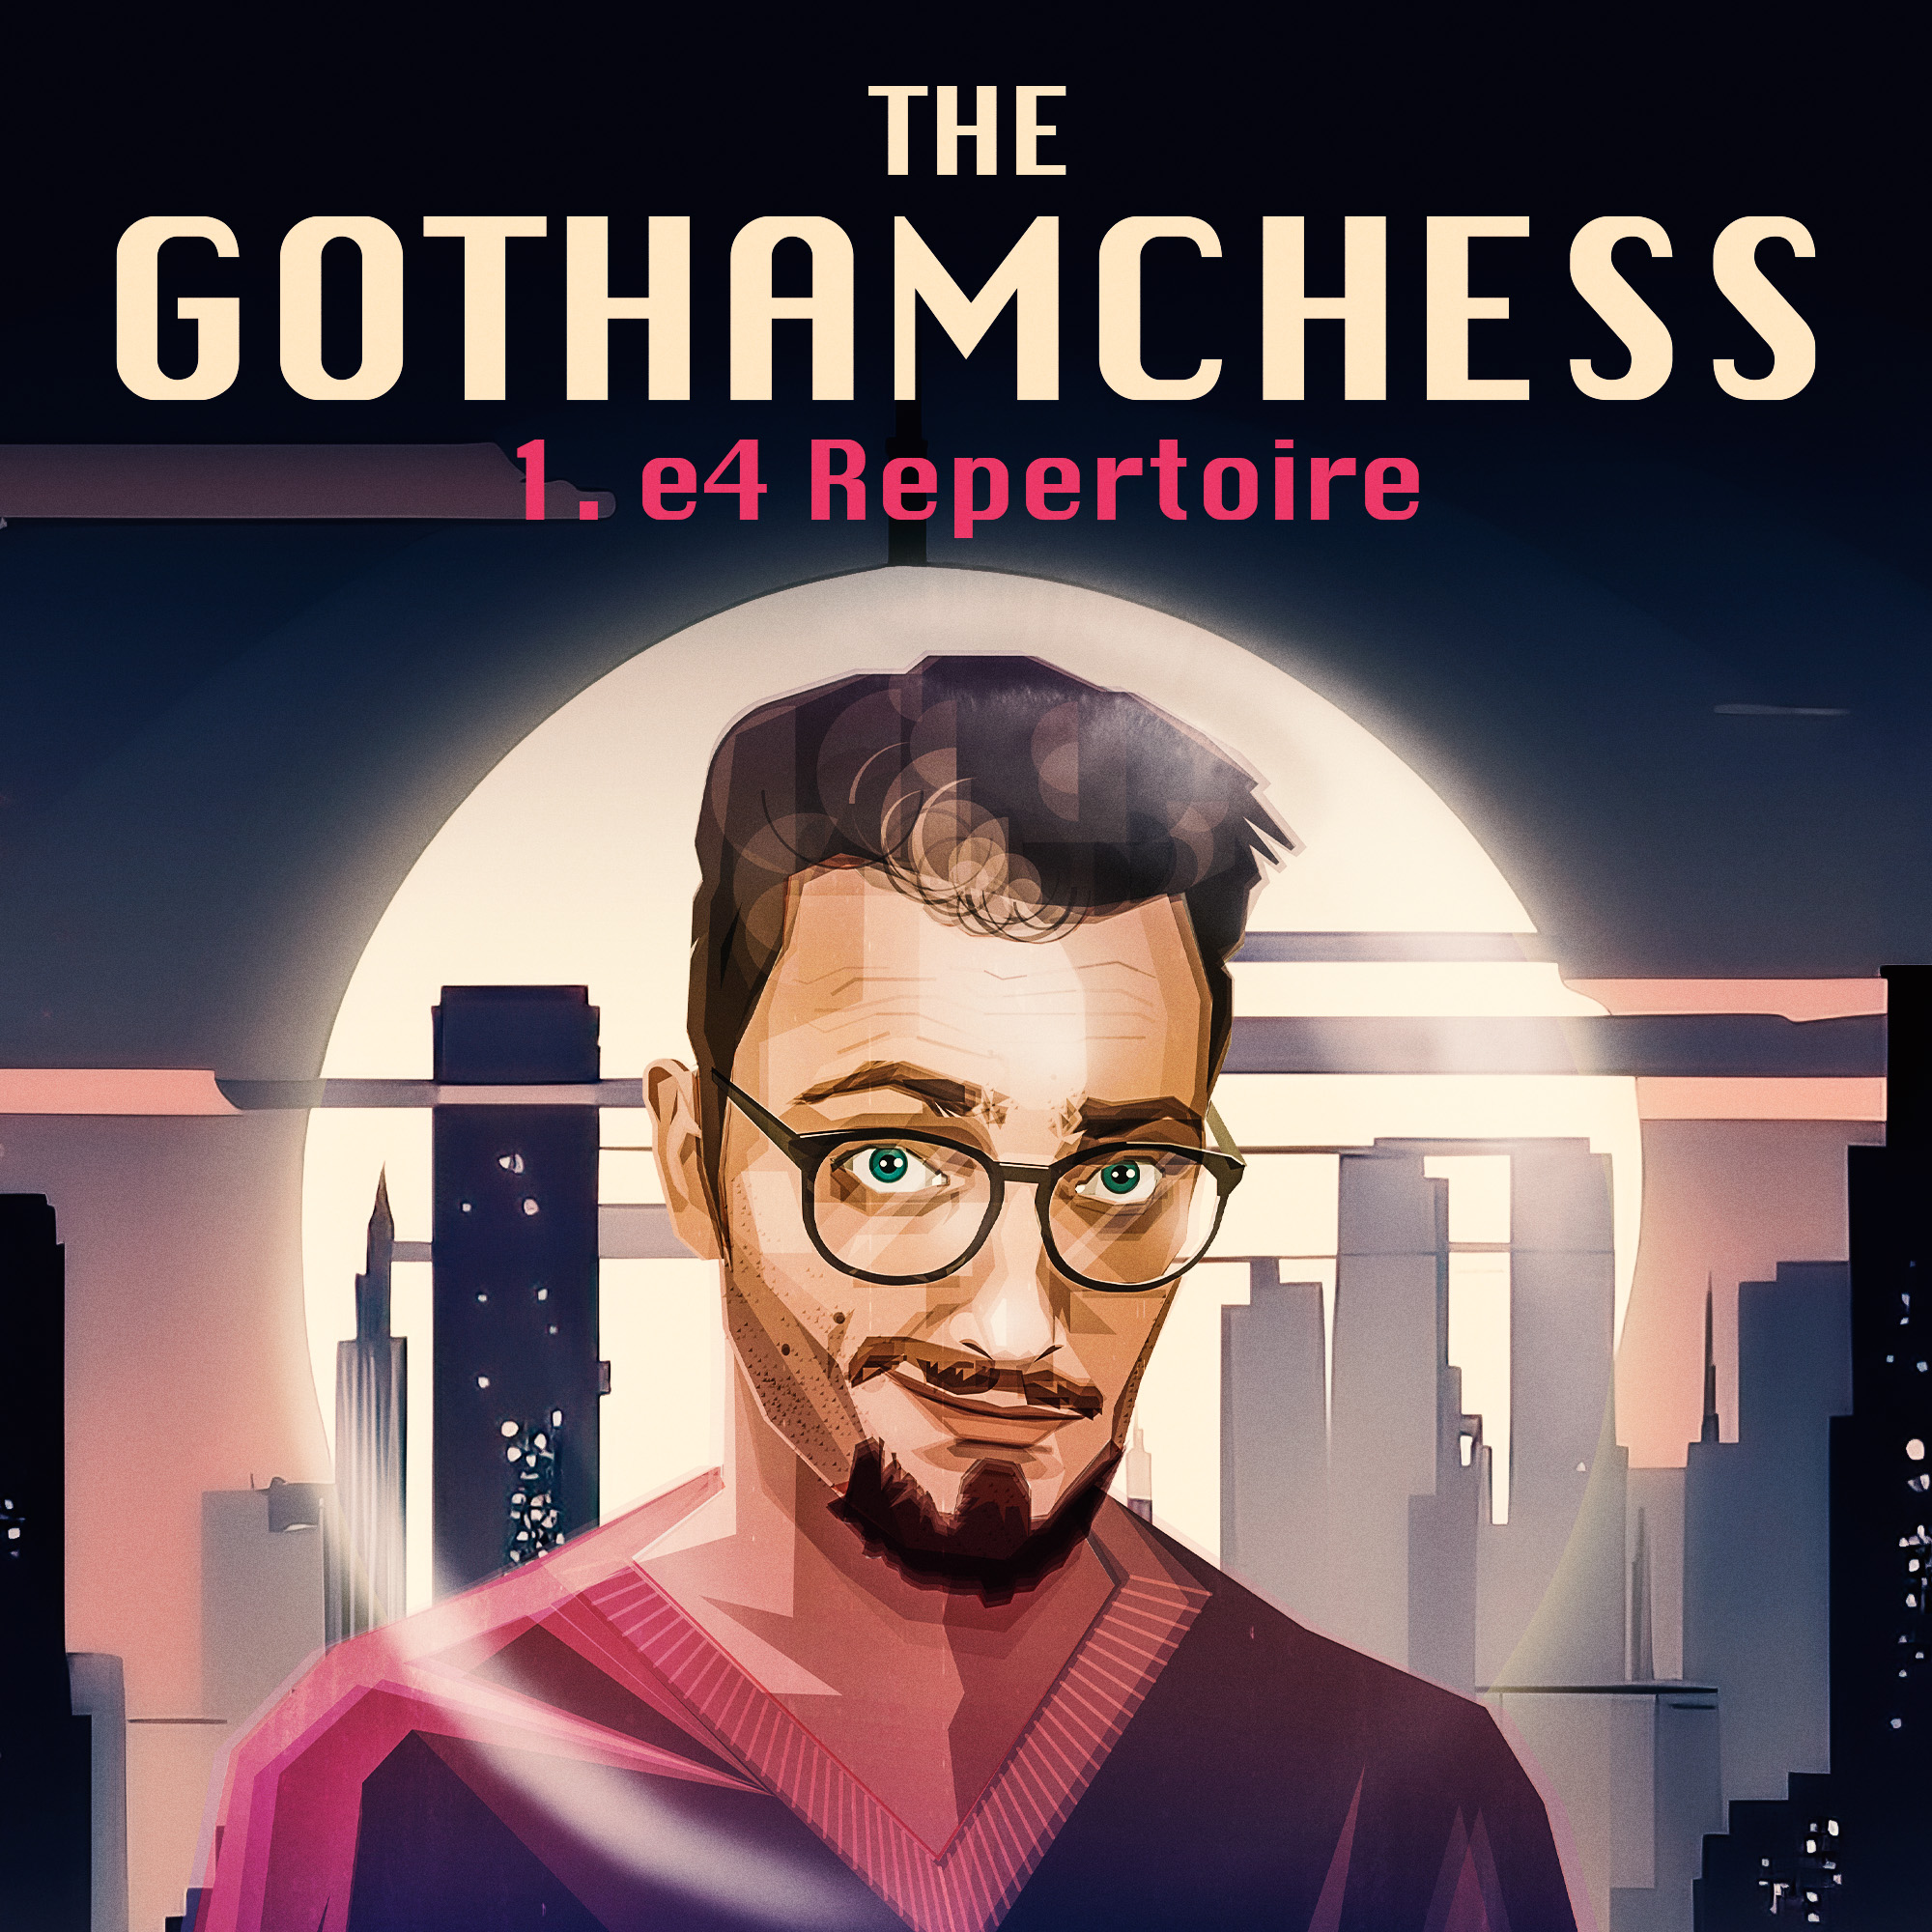 Levy is no longer Harry Potter. : r/GothamChess